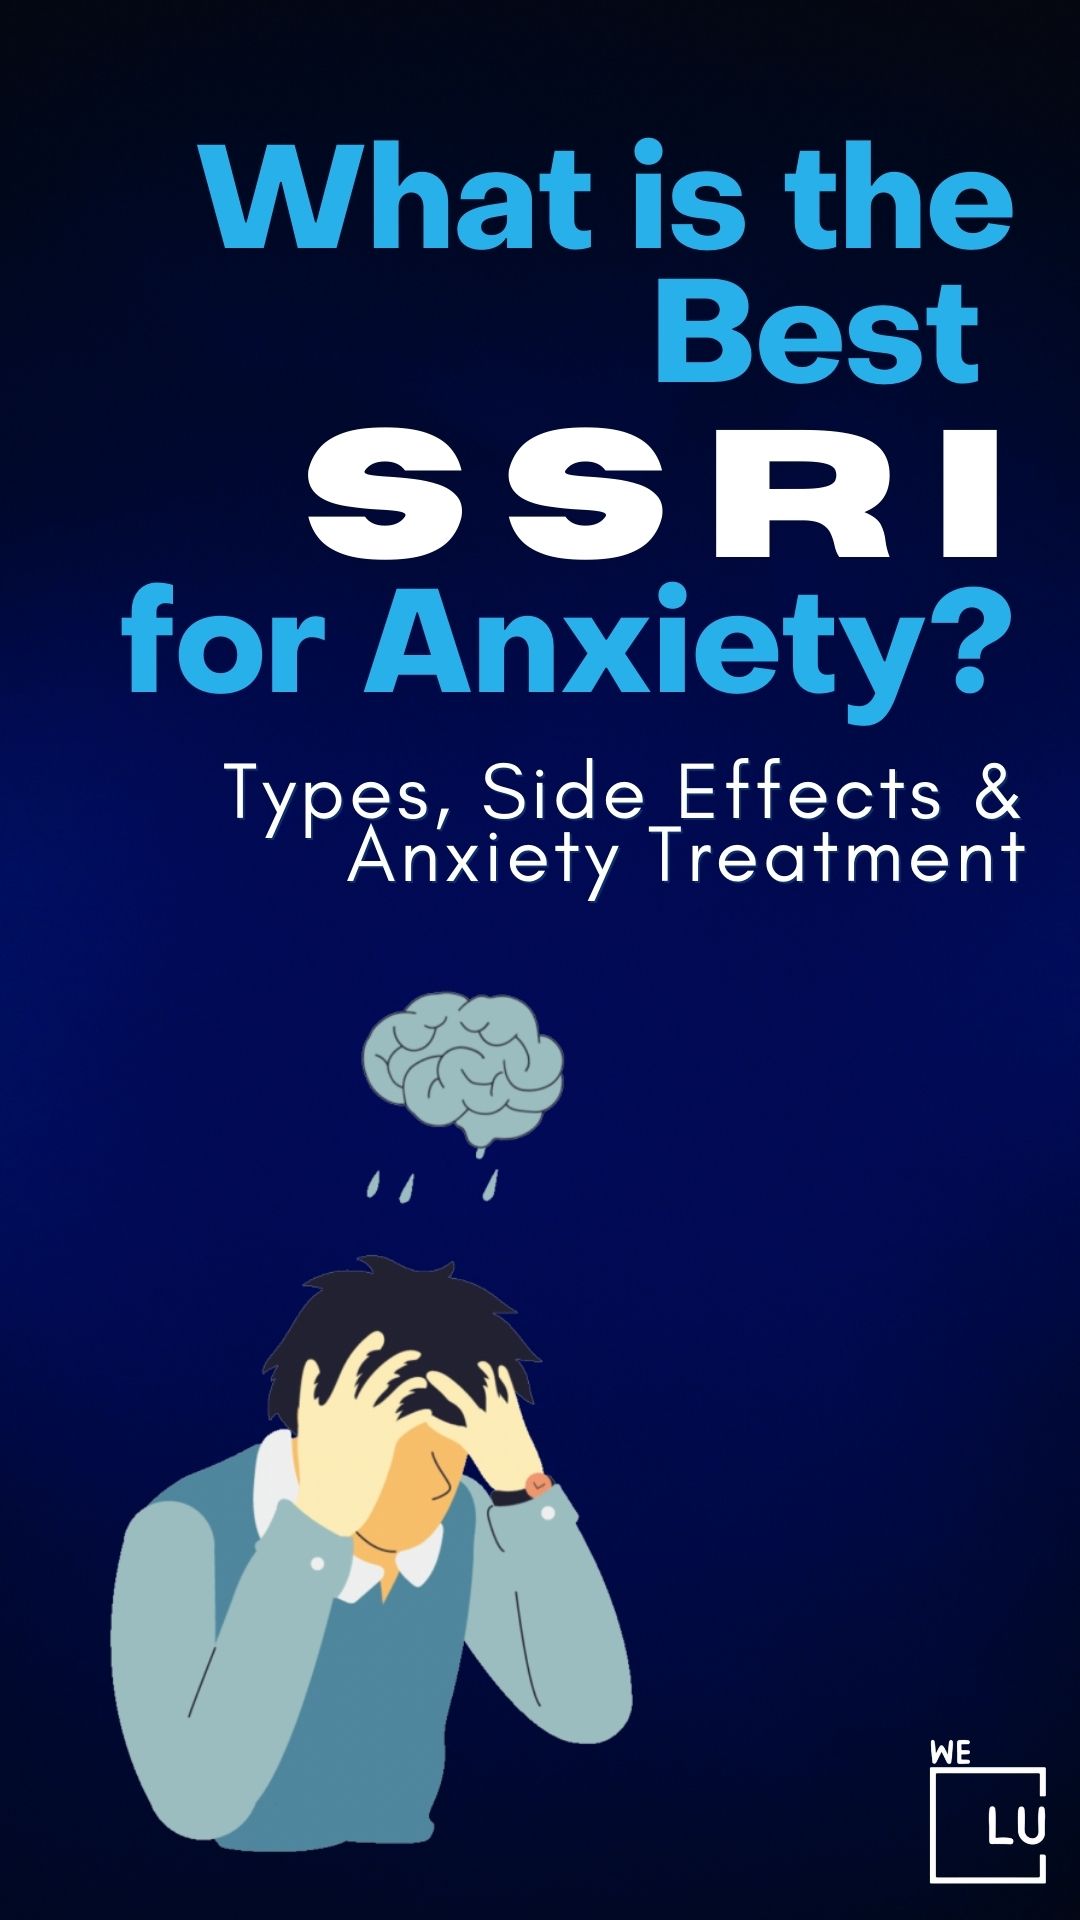 effective-top-7-types-medication-ssri-for-anxiety-treatment